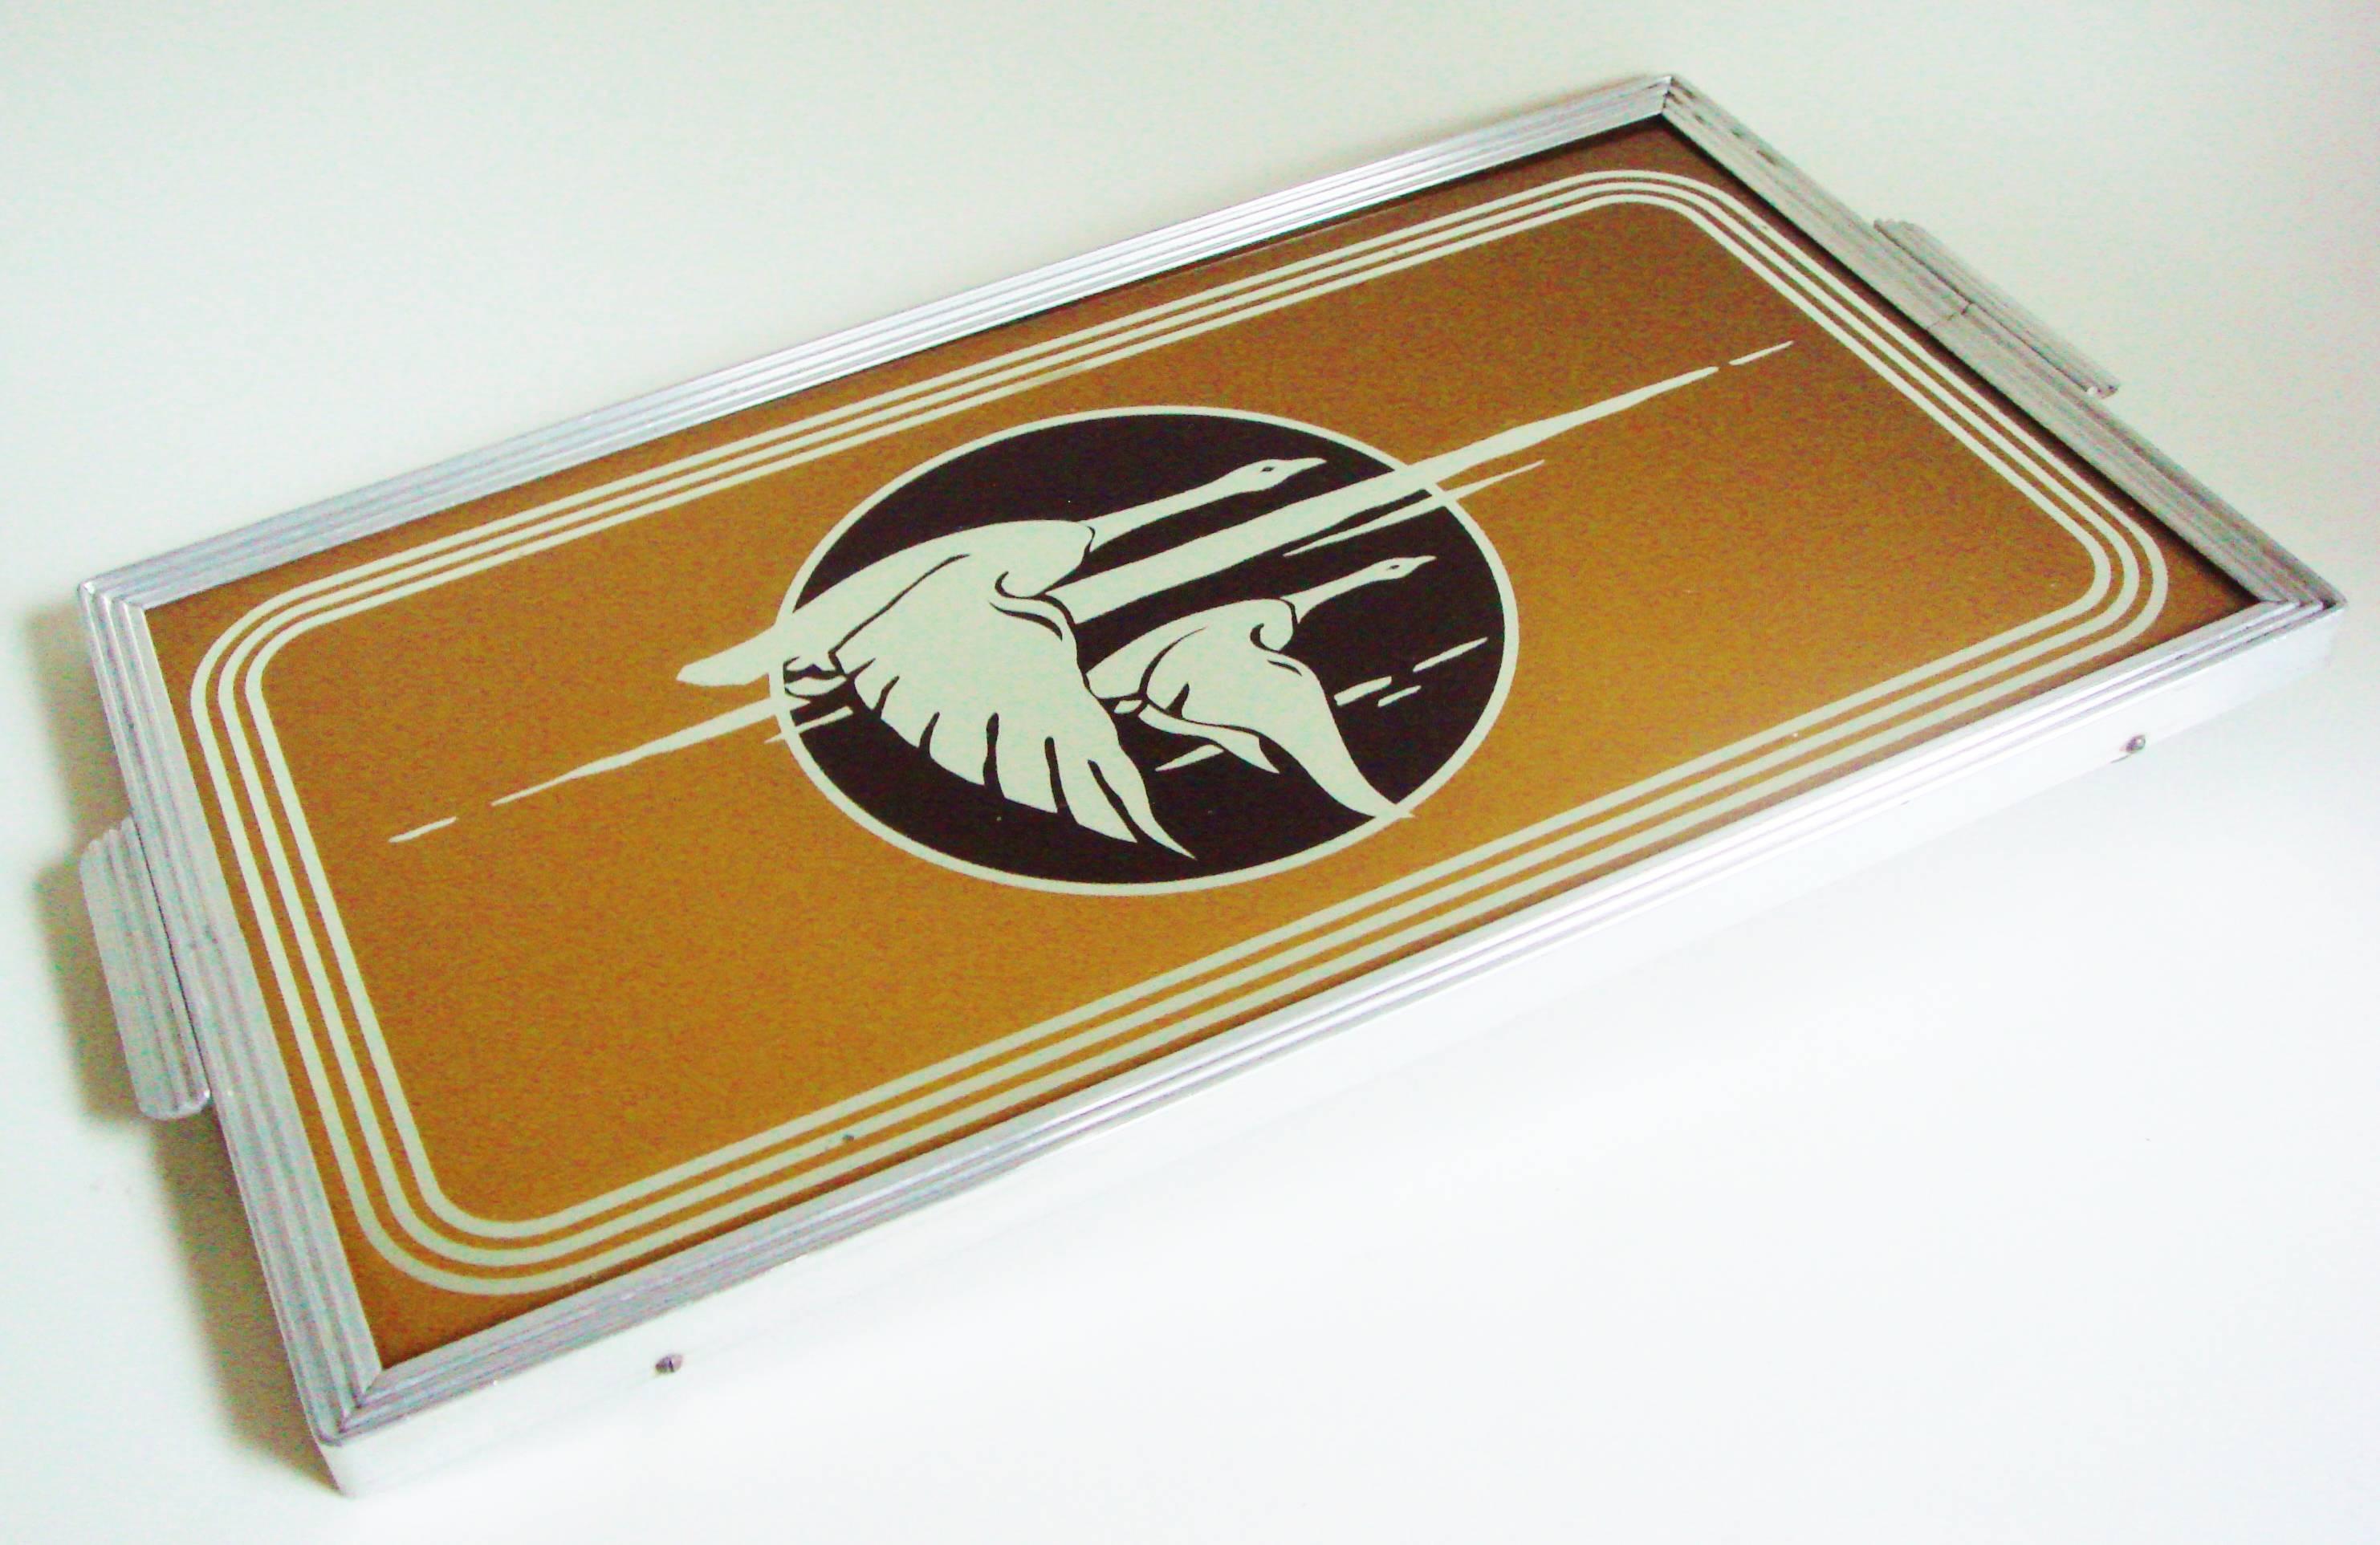 This American Art Deco reverse painted glass figural cocktail tray features two mirrored geese flying over a black sun with mirrored clouds and framed by three mirrored bands. The sand colored background is surrounded by a ribbed aluminum frame with